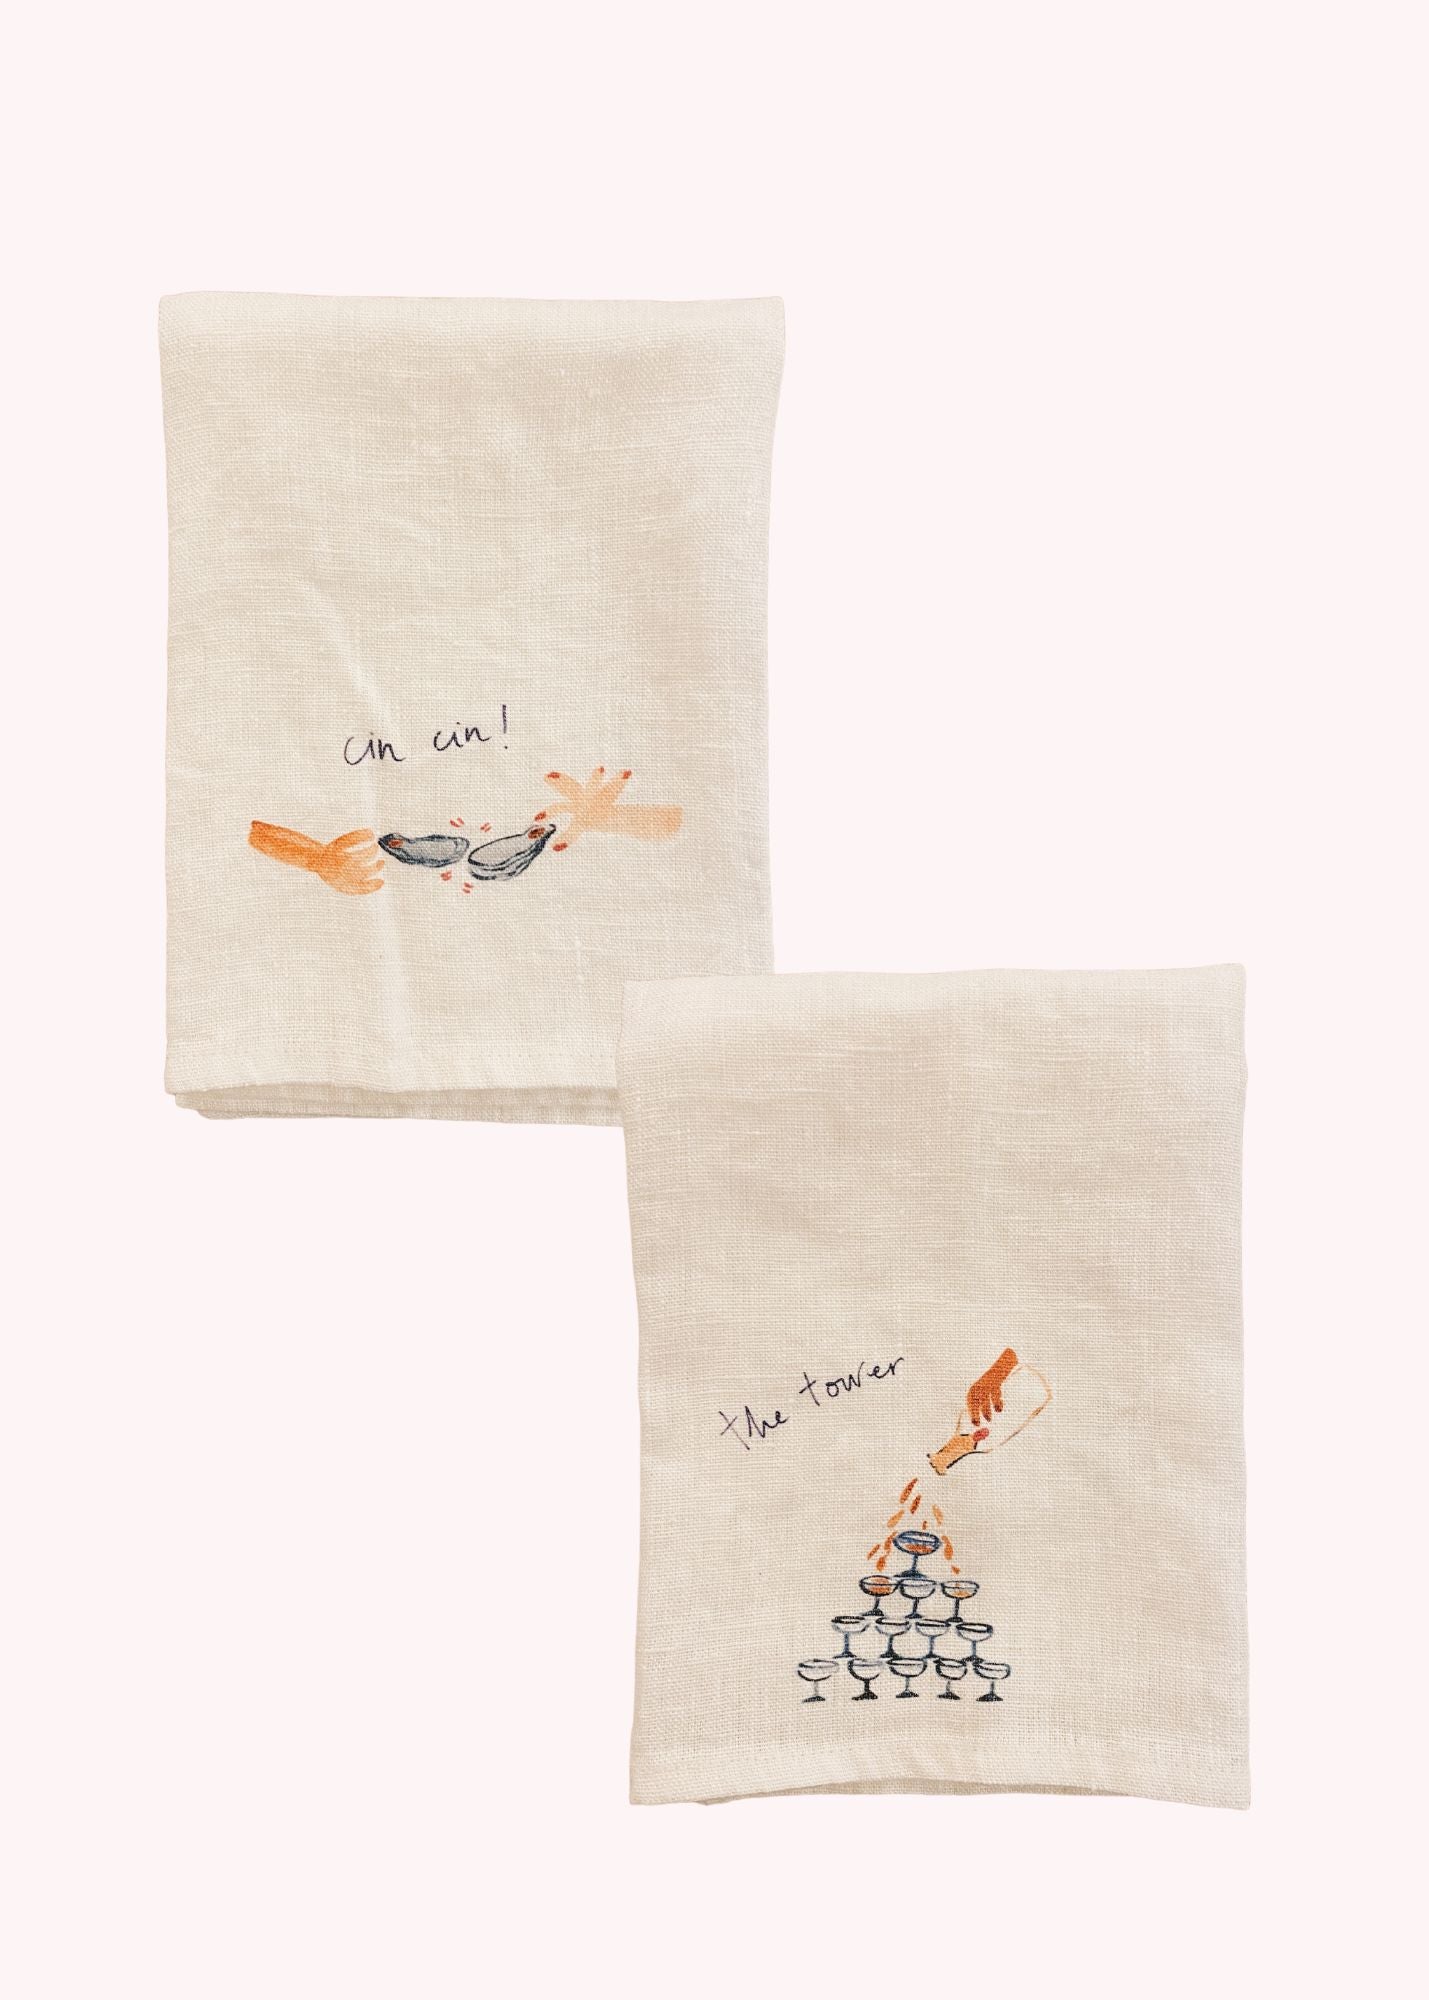 The Tower & Oyster Cheers -  Set of Two Linen Napkins